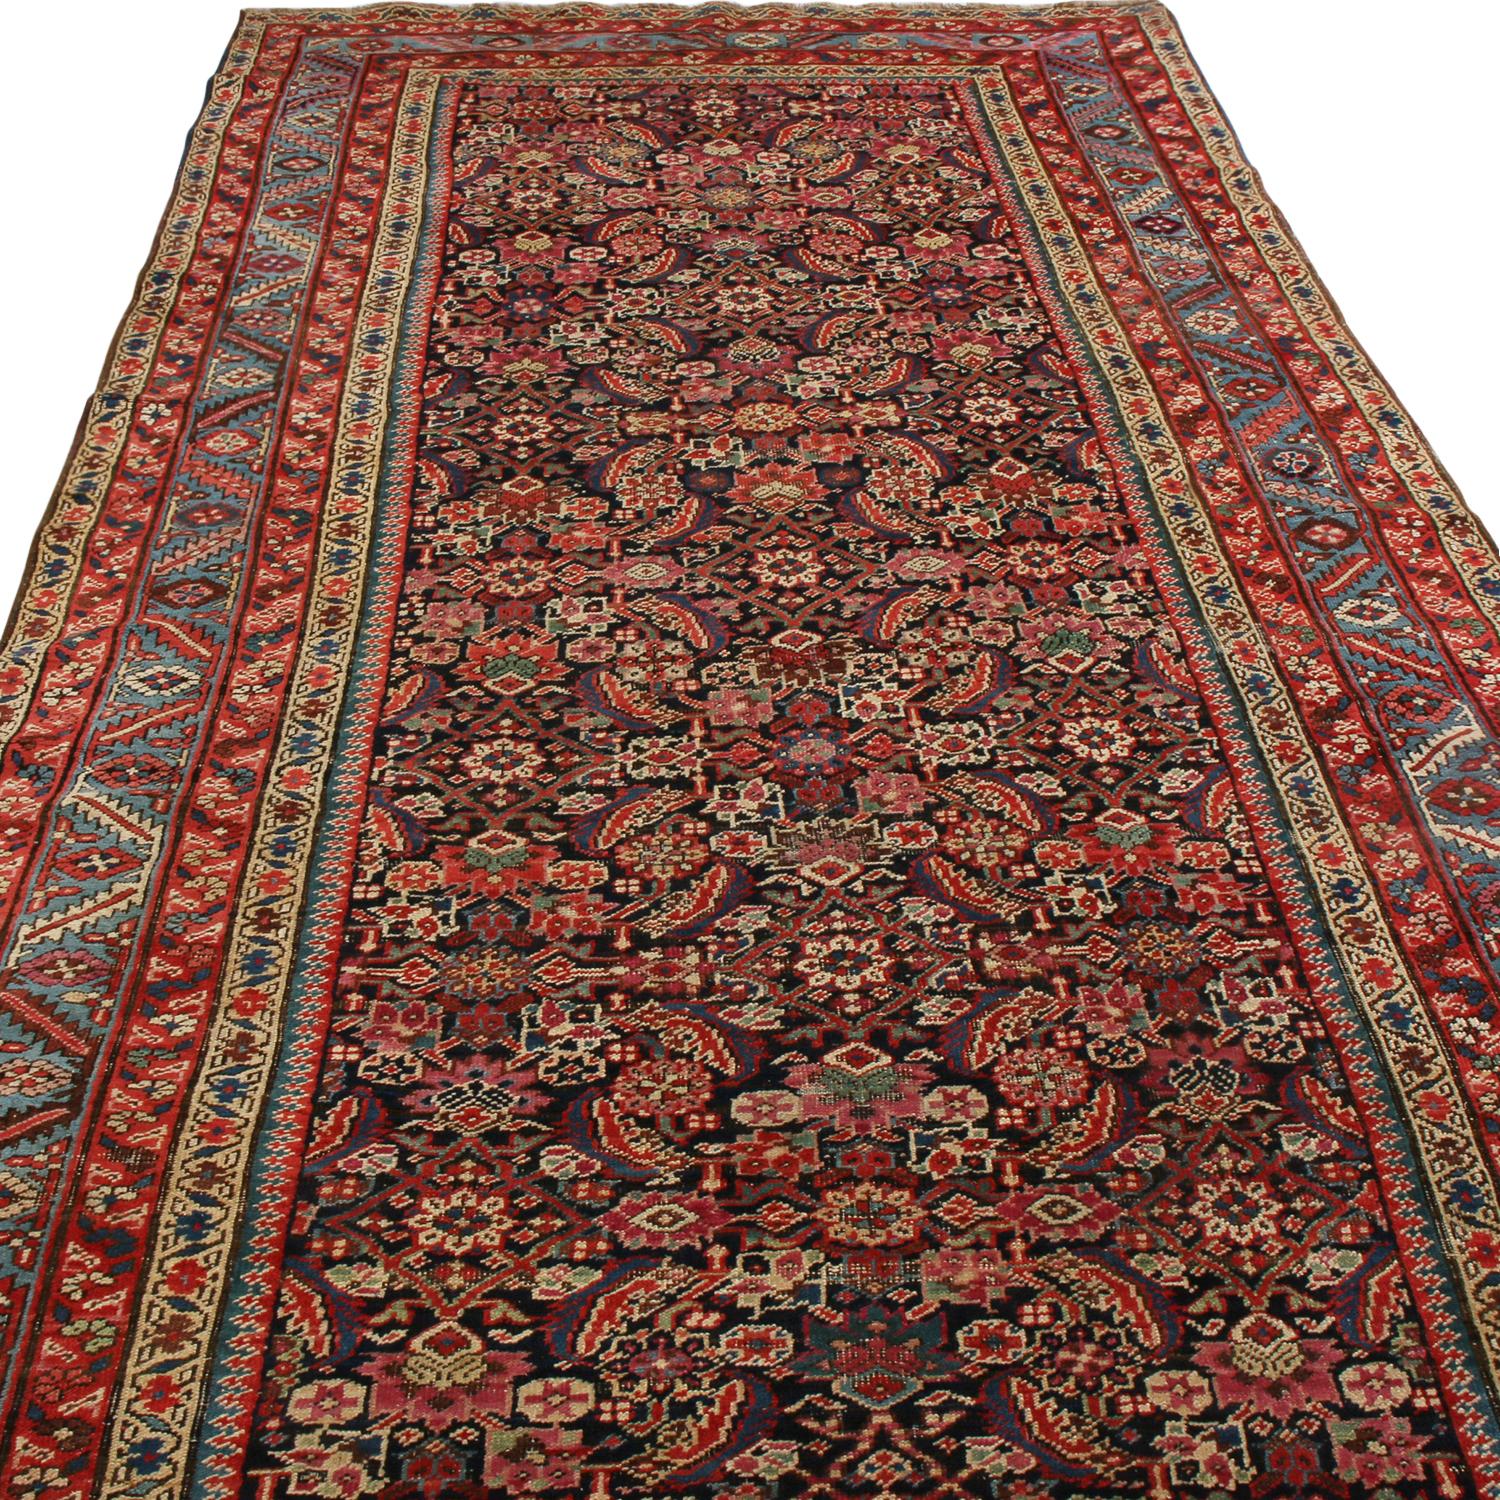 Originating from Russia between 1880-1890, this antique Karabagh rug enjoys a special variation of the Herati field design, sometimes known as the “fish” pattern for the resemblance of its finely stylized leaves in surrounding elegant rose patterns.